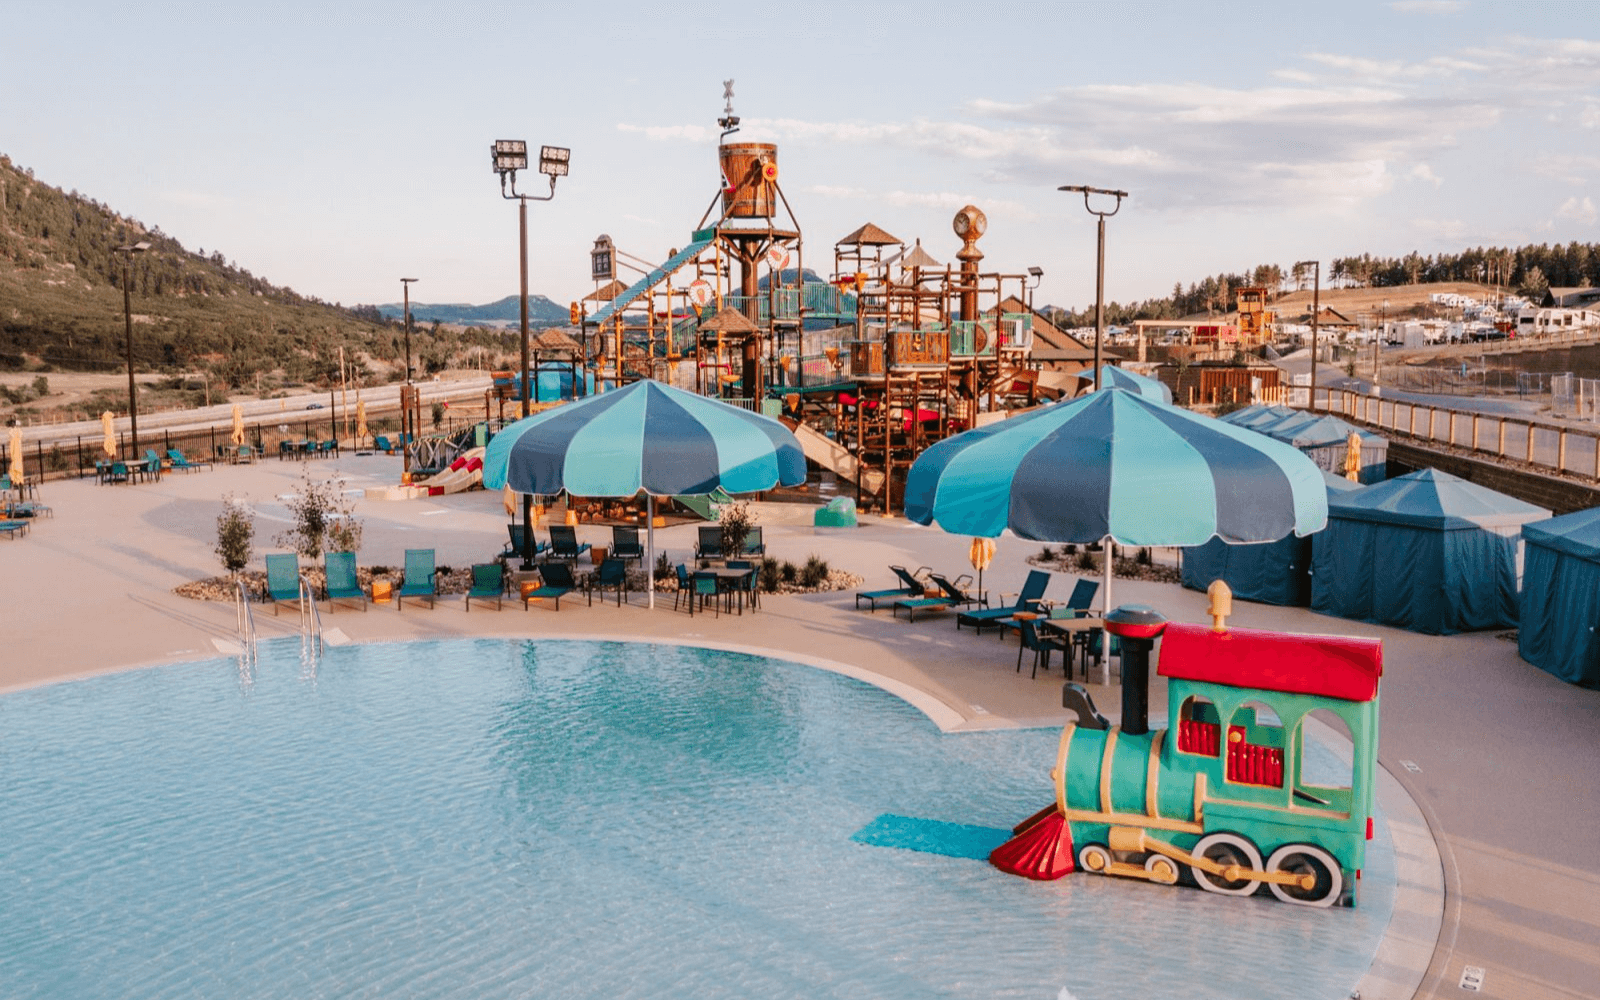 The water park at Jellystone 